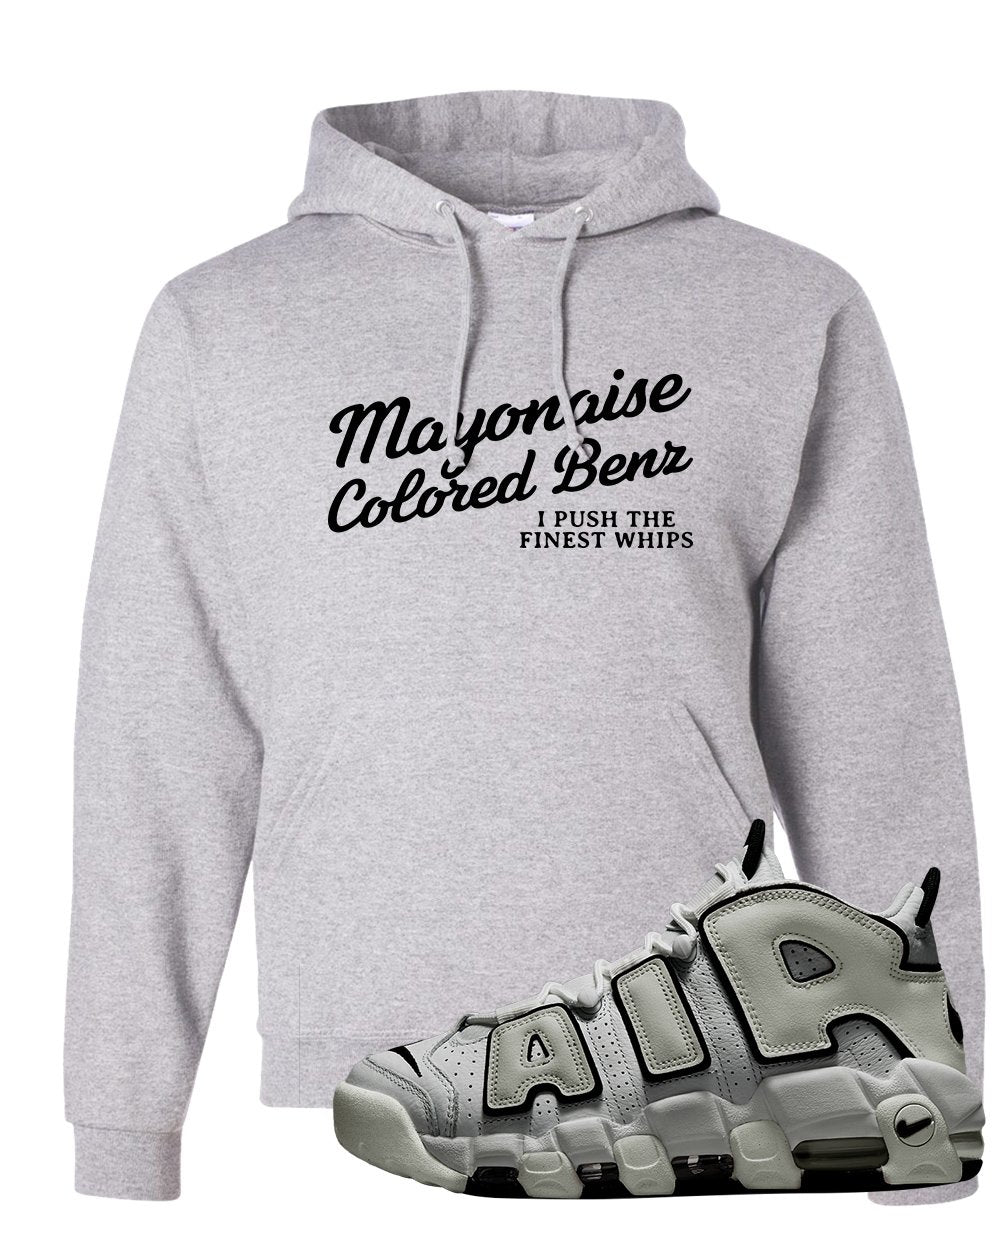 White Black Uptempos Hoodie | Mayonaise Colored Benz, Ash